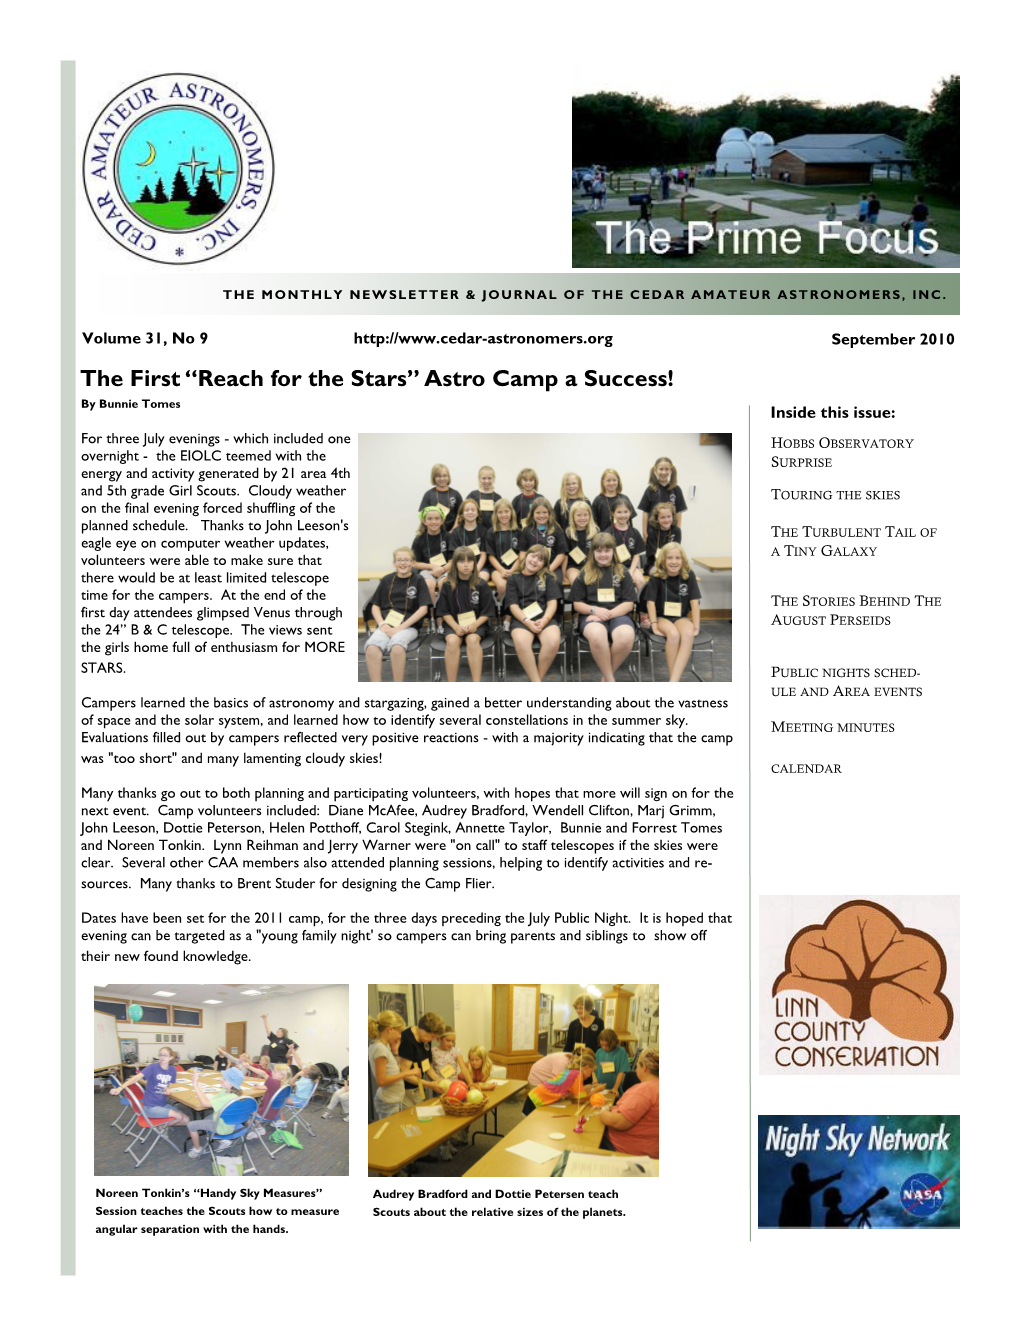 The First “Reach for the Stars” Astro Camp a Success! by Bunnie Tomes Inside This Issue